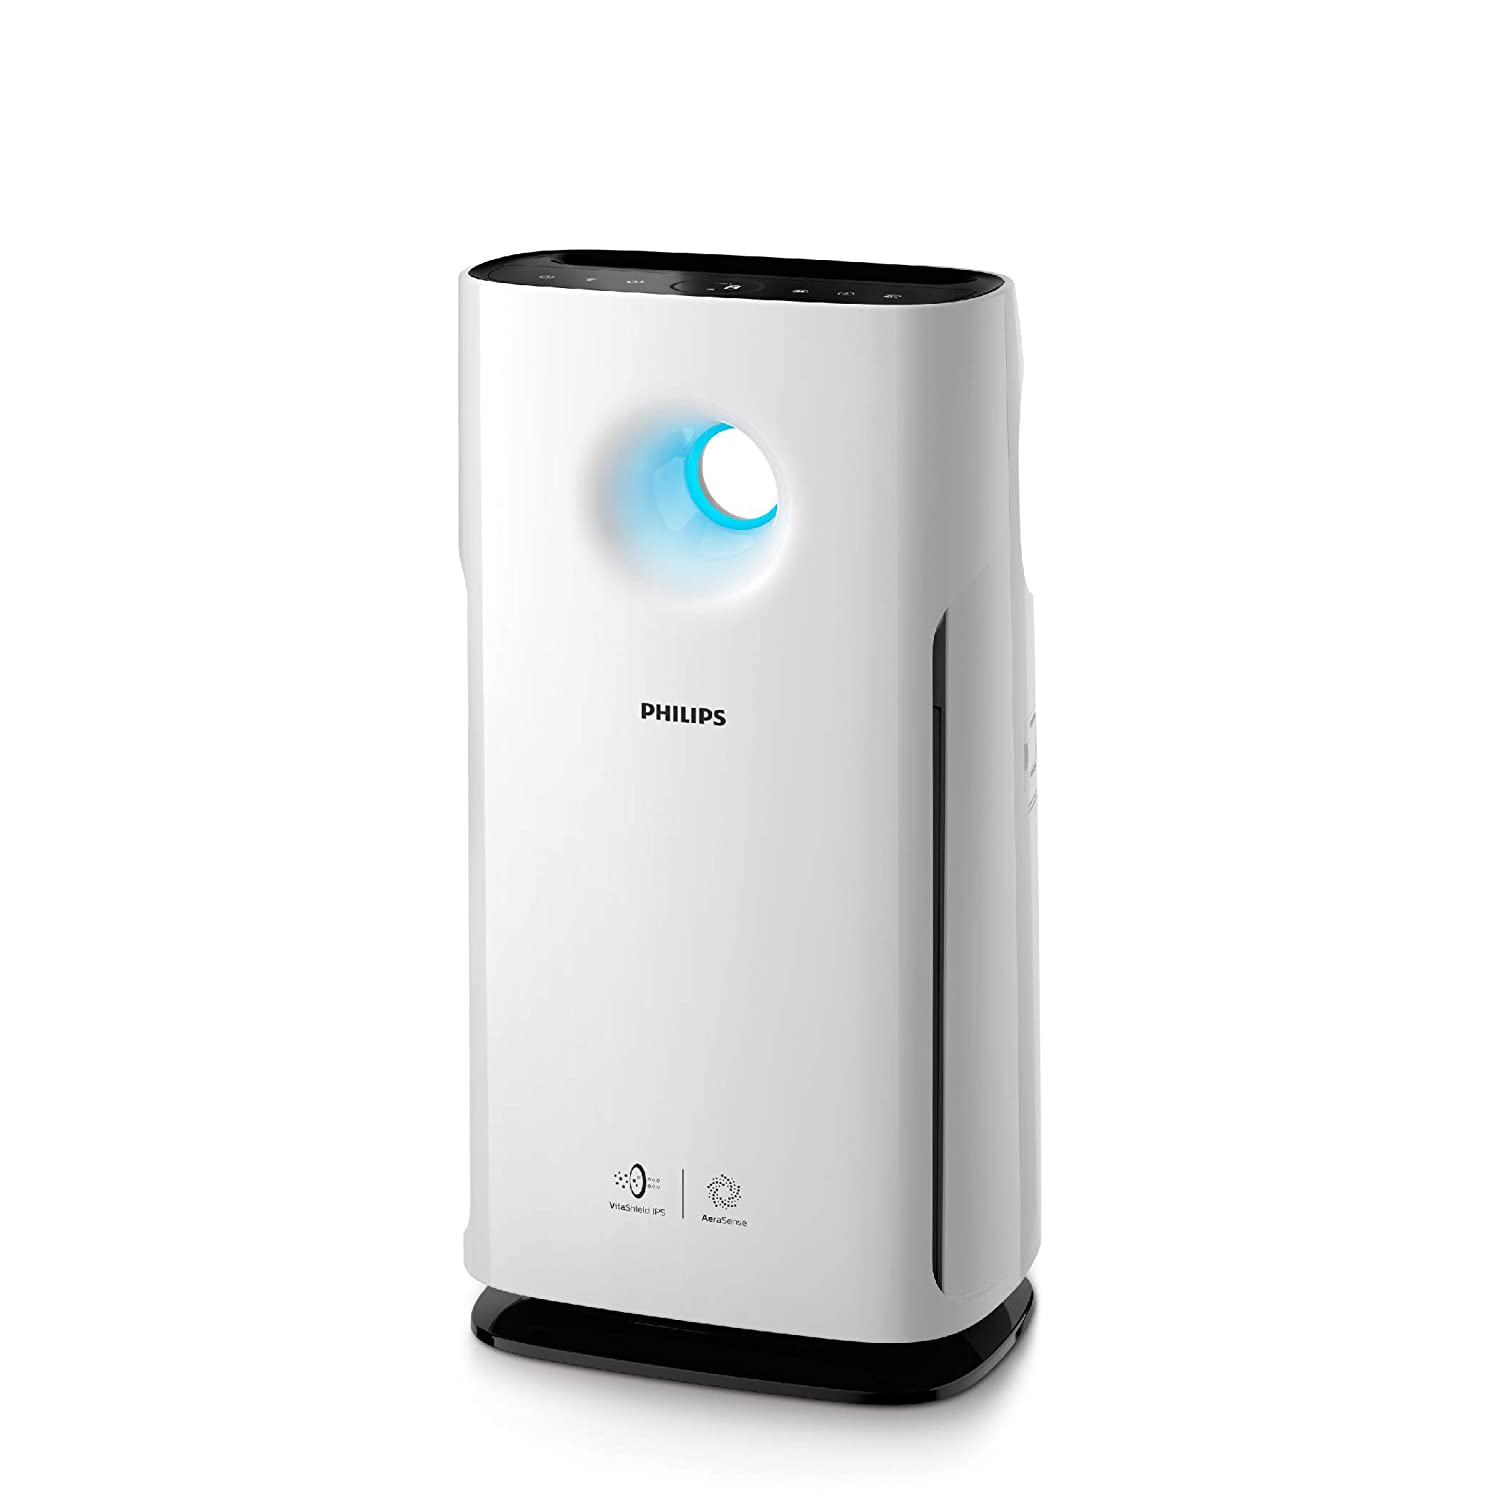 Philips 3000 series is the best selling AHAM certified air purifier in India